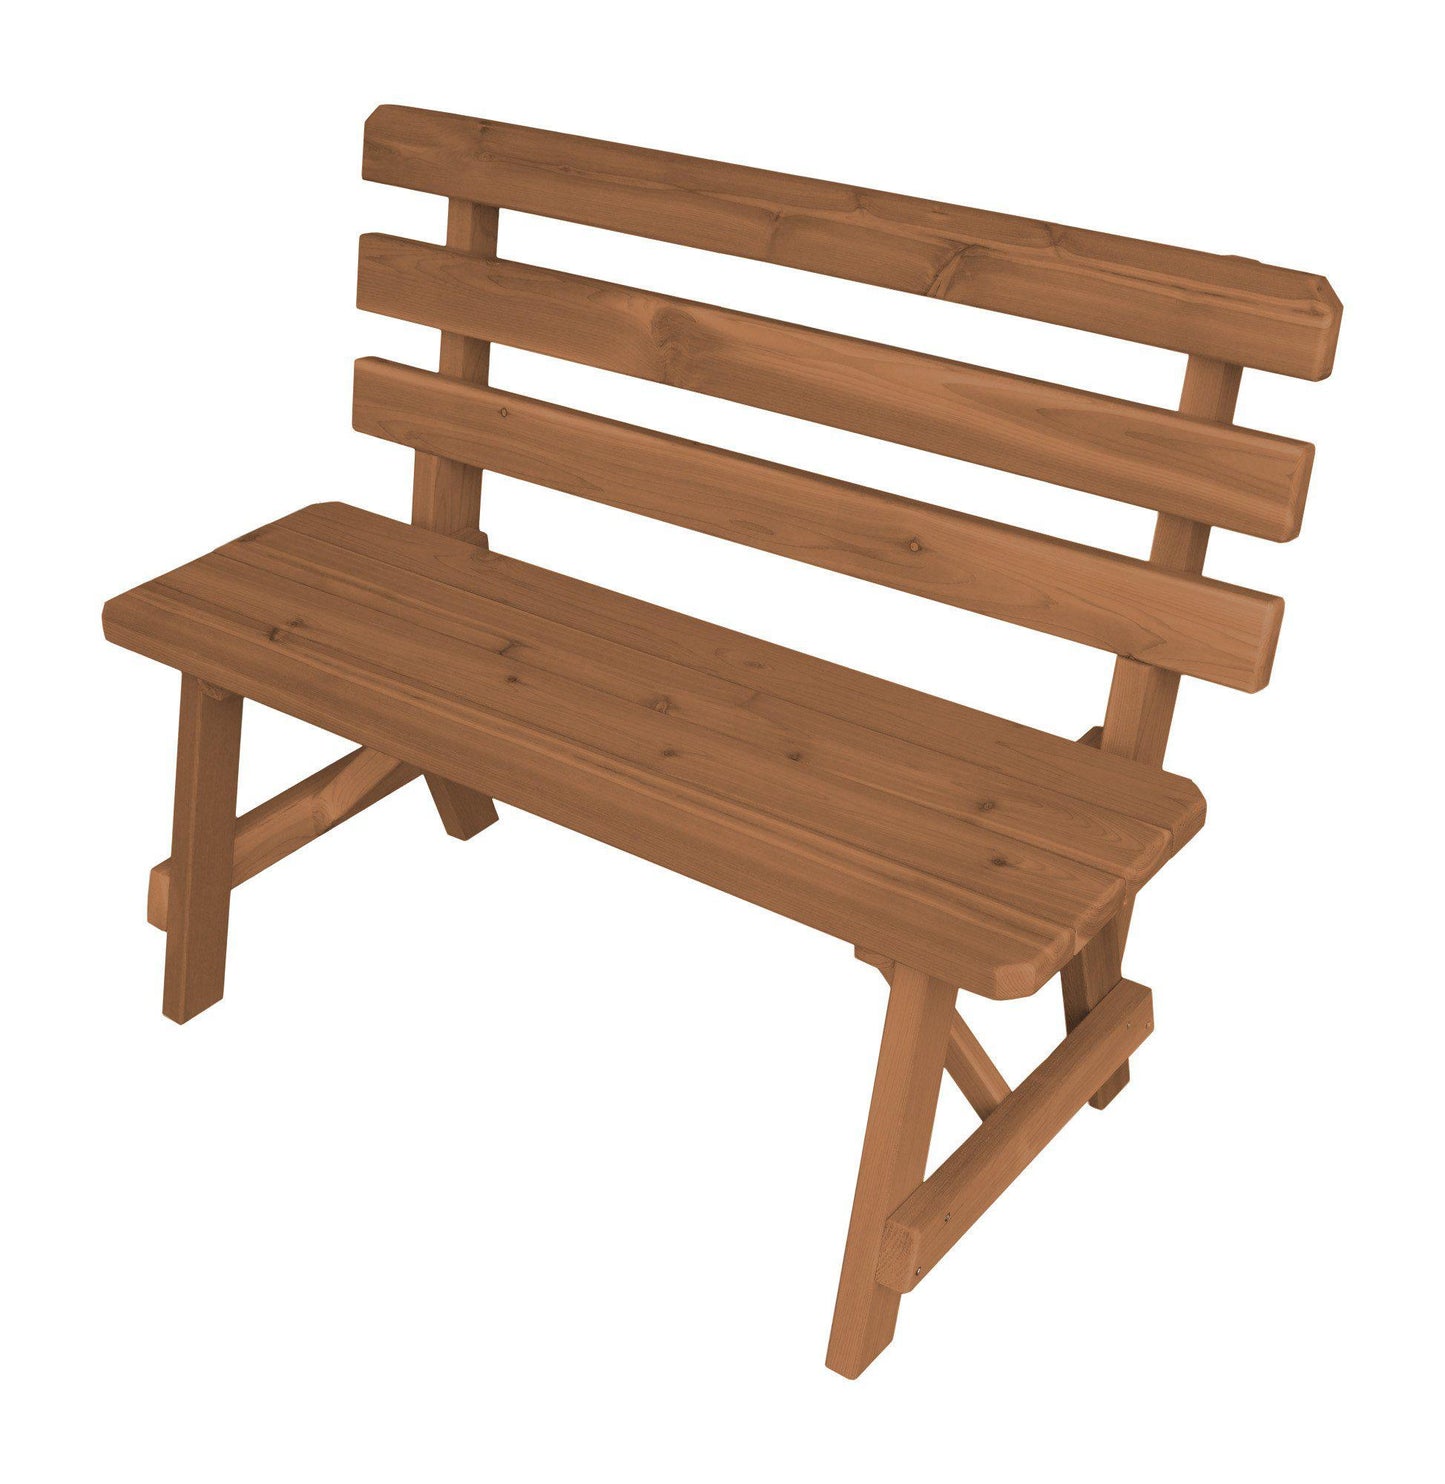 A&L FURNITURE CO. Western Red Cedar 23" Traditional Backed Bench Only - LEAD TIME TO SHIP 4 WEEKS OR LESS